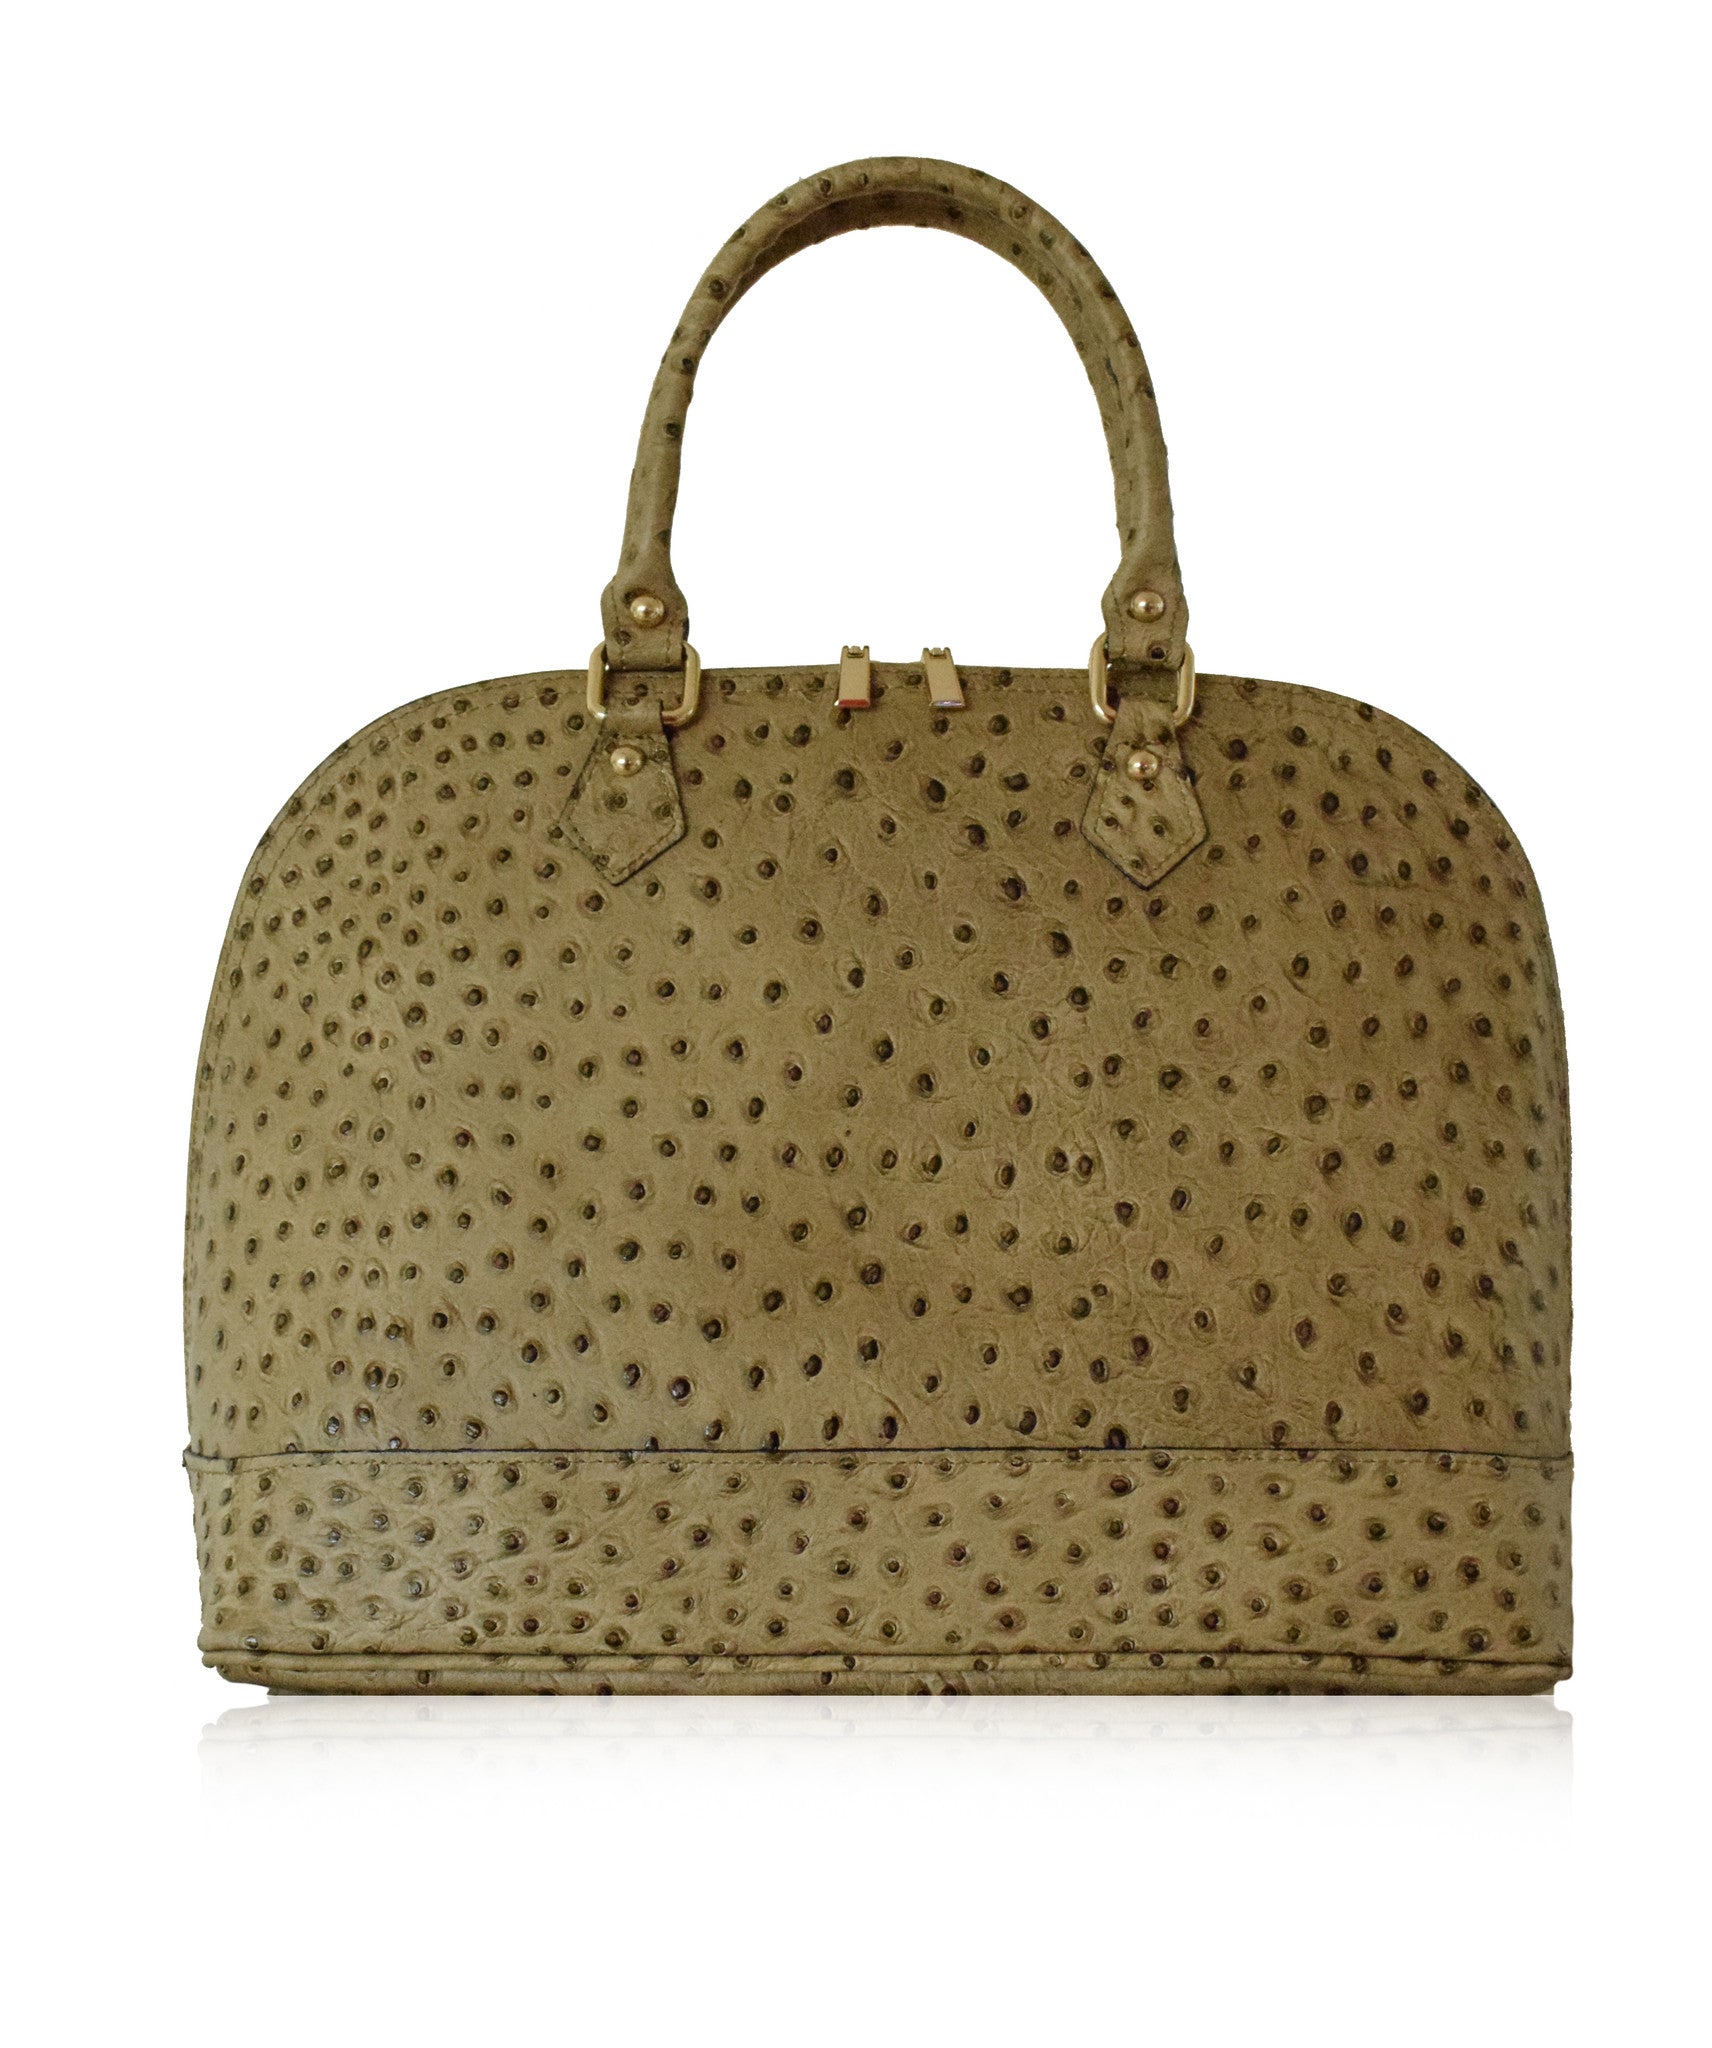 FIRENZE Beige LOUIS VUITTON Alma PM Style Tote Bag | Florence Leather Collection